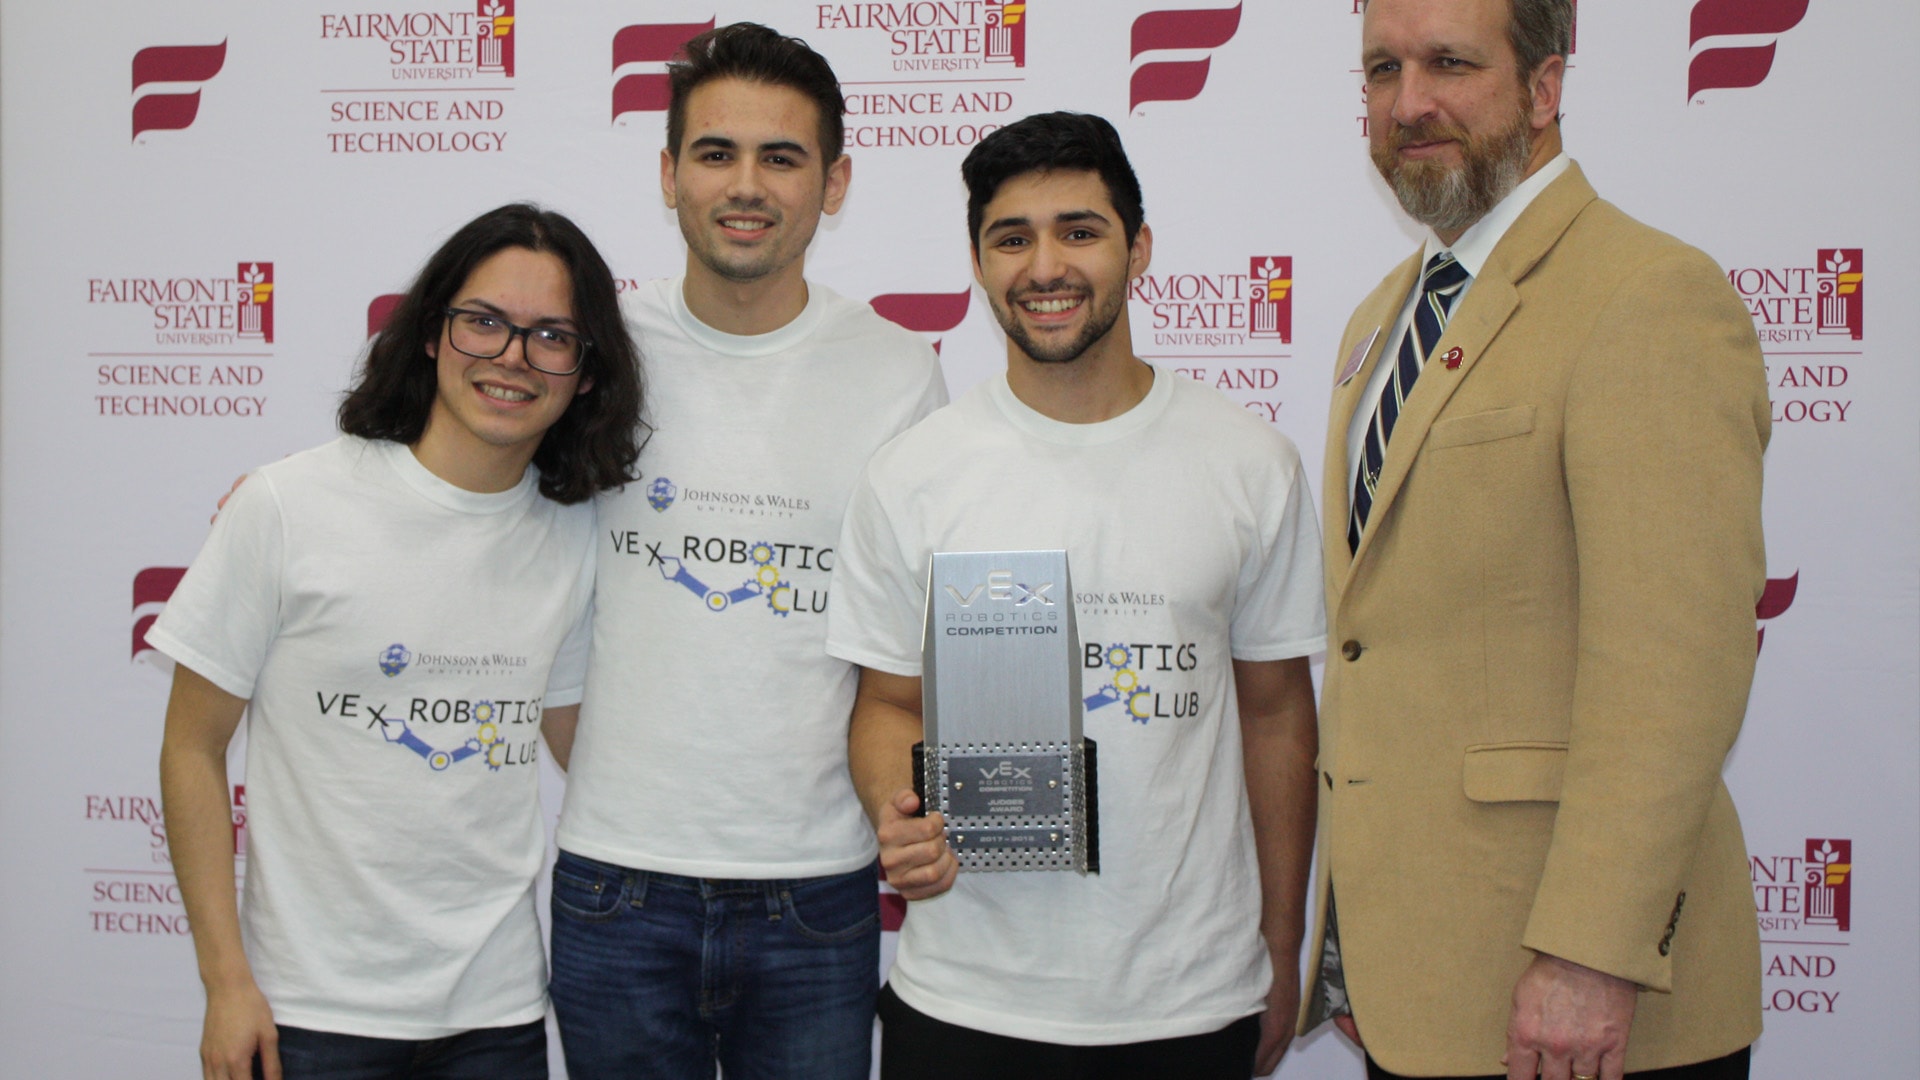 Edgar Falcón, Jossean Rivera and Manuel Rosado pose with Donald Trisel, Dean of the College of Science & Technology at Fairmont State University, after receiving the Judges Award.